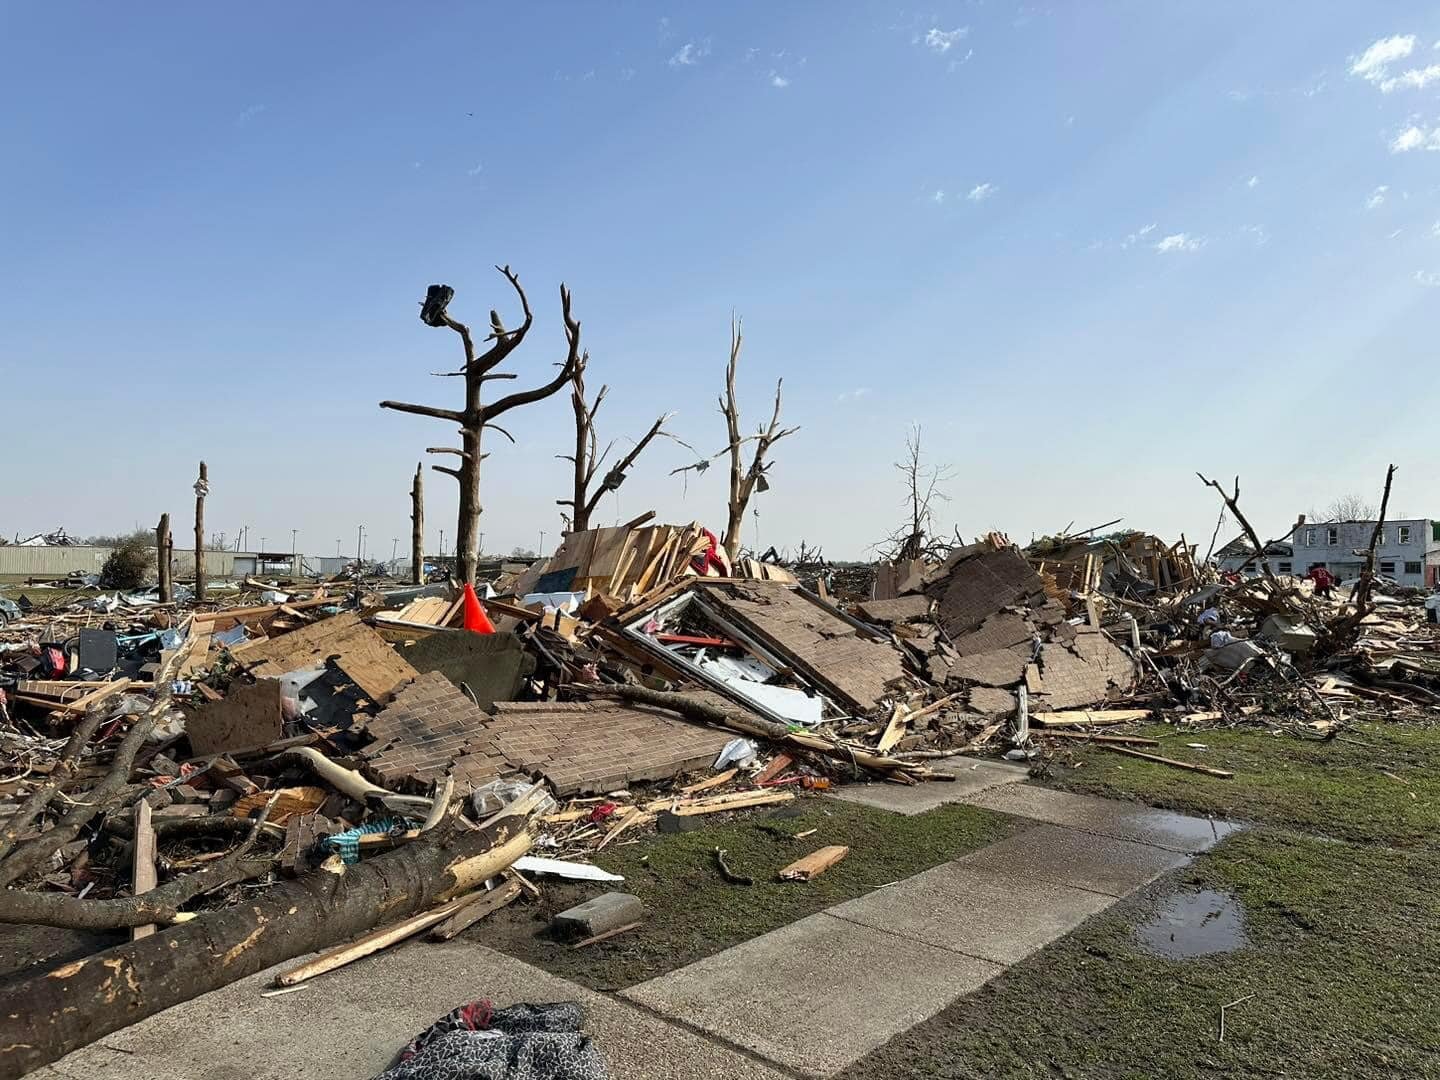 Sullivan’s Marketplace partnered with the City of Gluckstadt and served as a large collection point for items to be sent to Rolling Fork after an EF-4 tornado devastated the Delta on March 24.